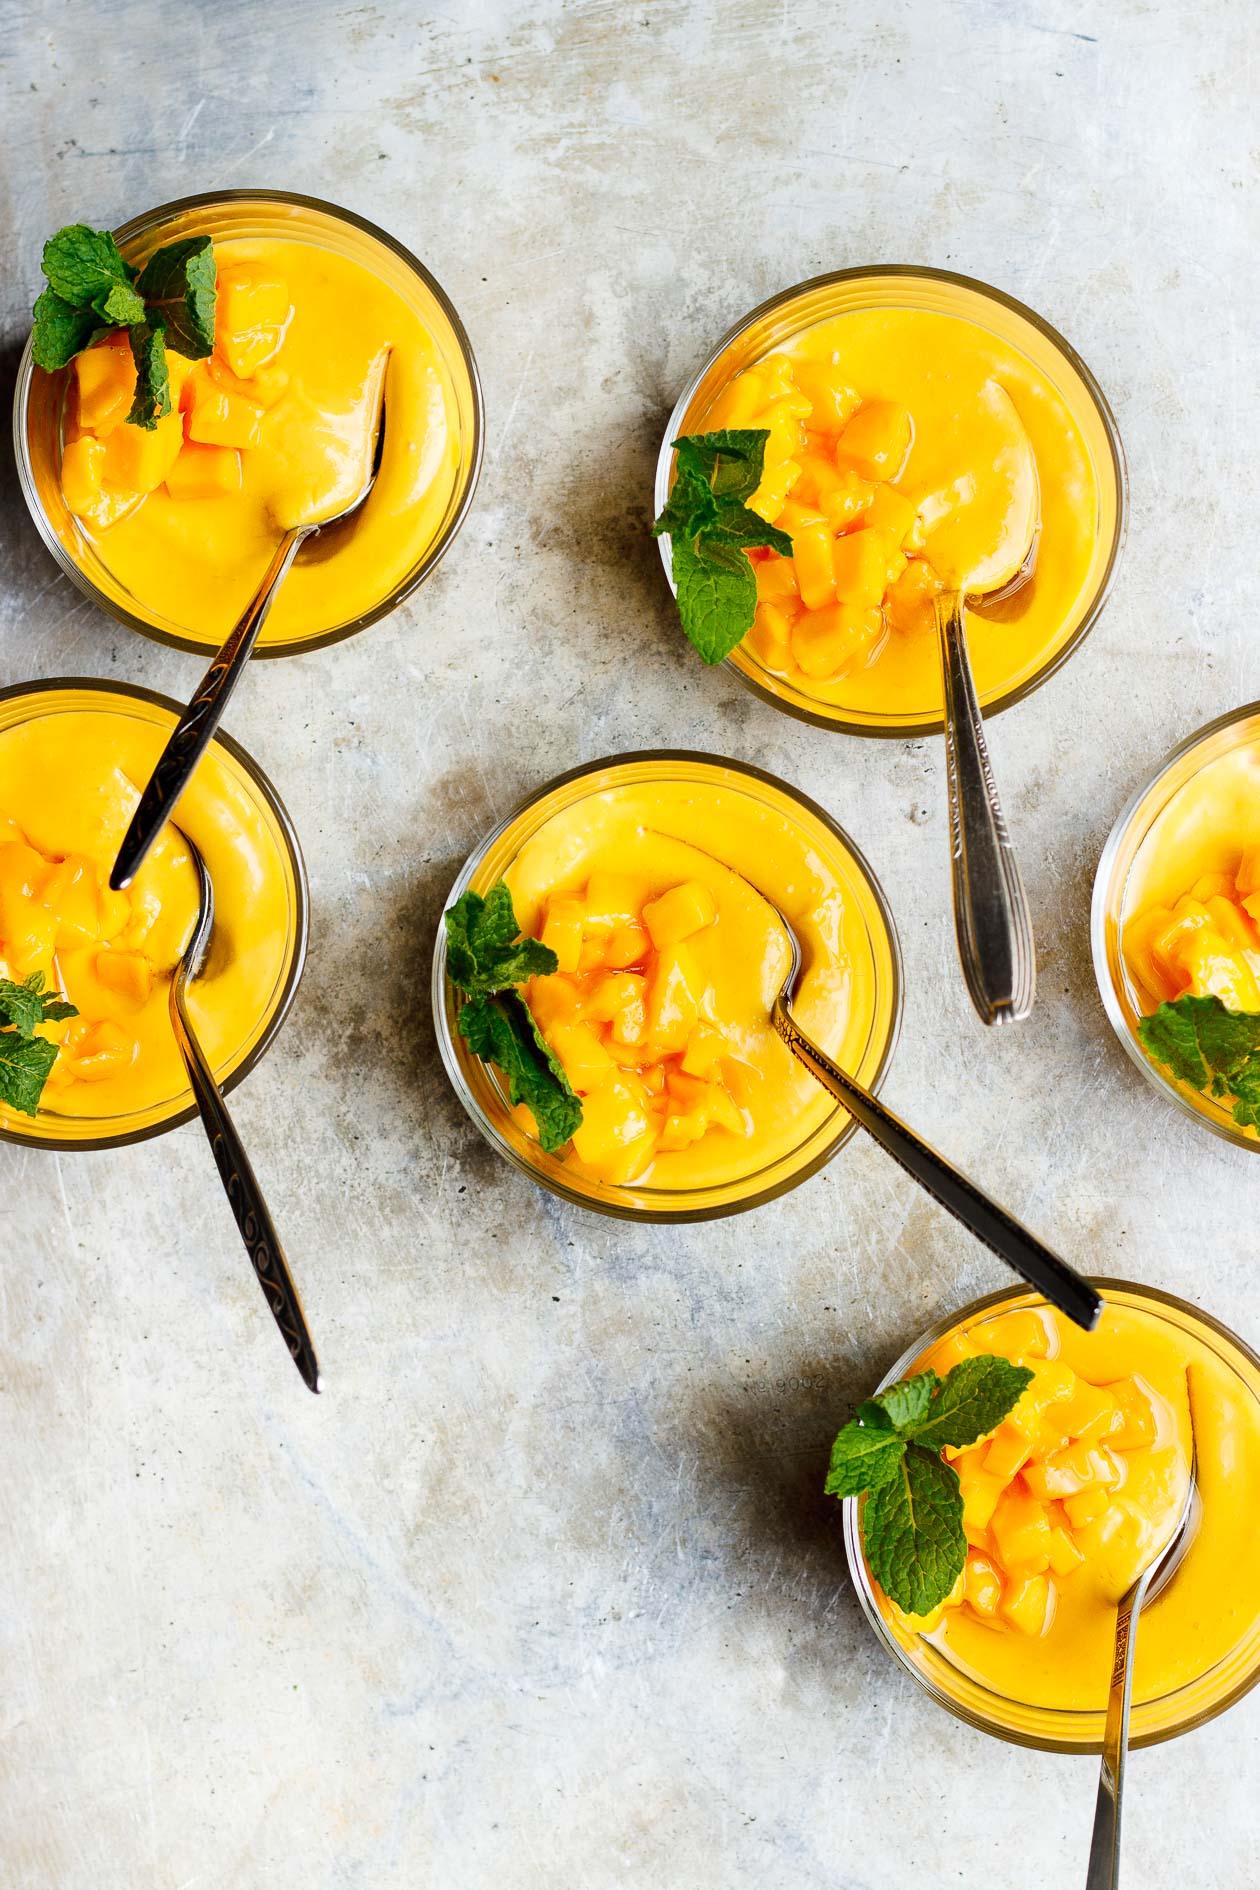 MANGO PUDDING WITH MINT SIMPLE SYRUP